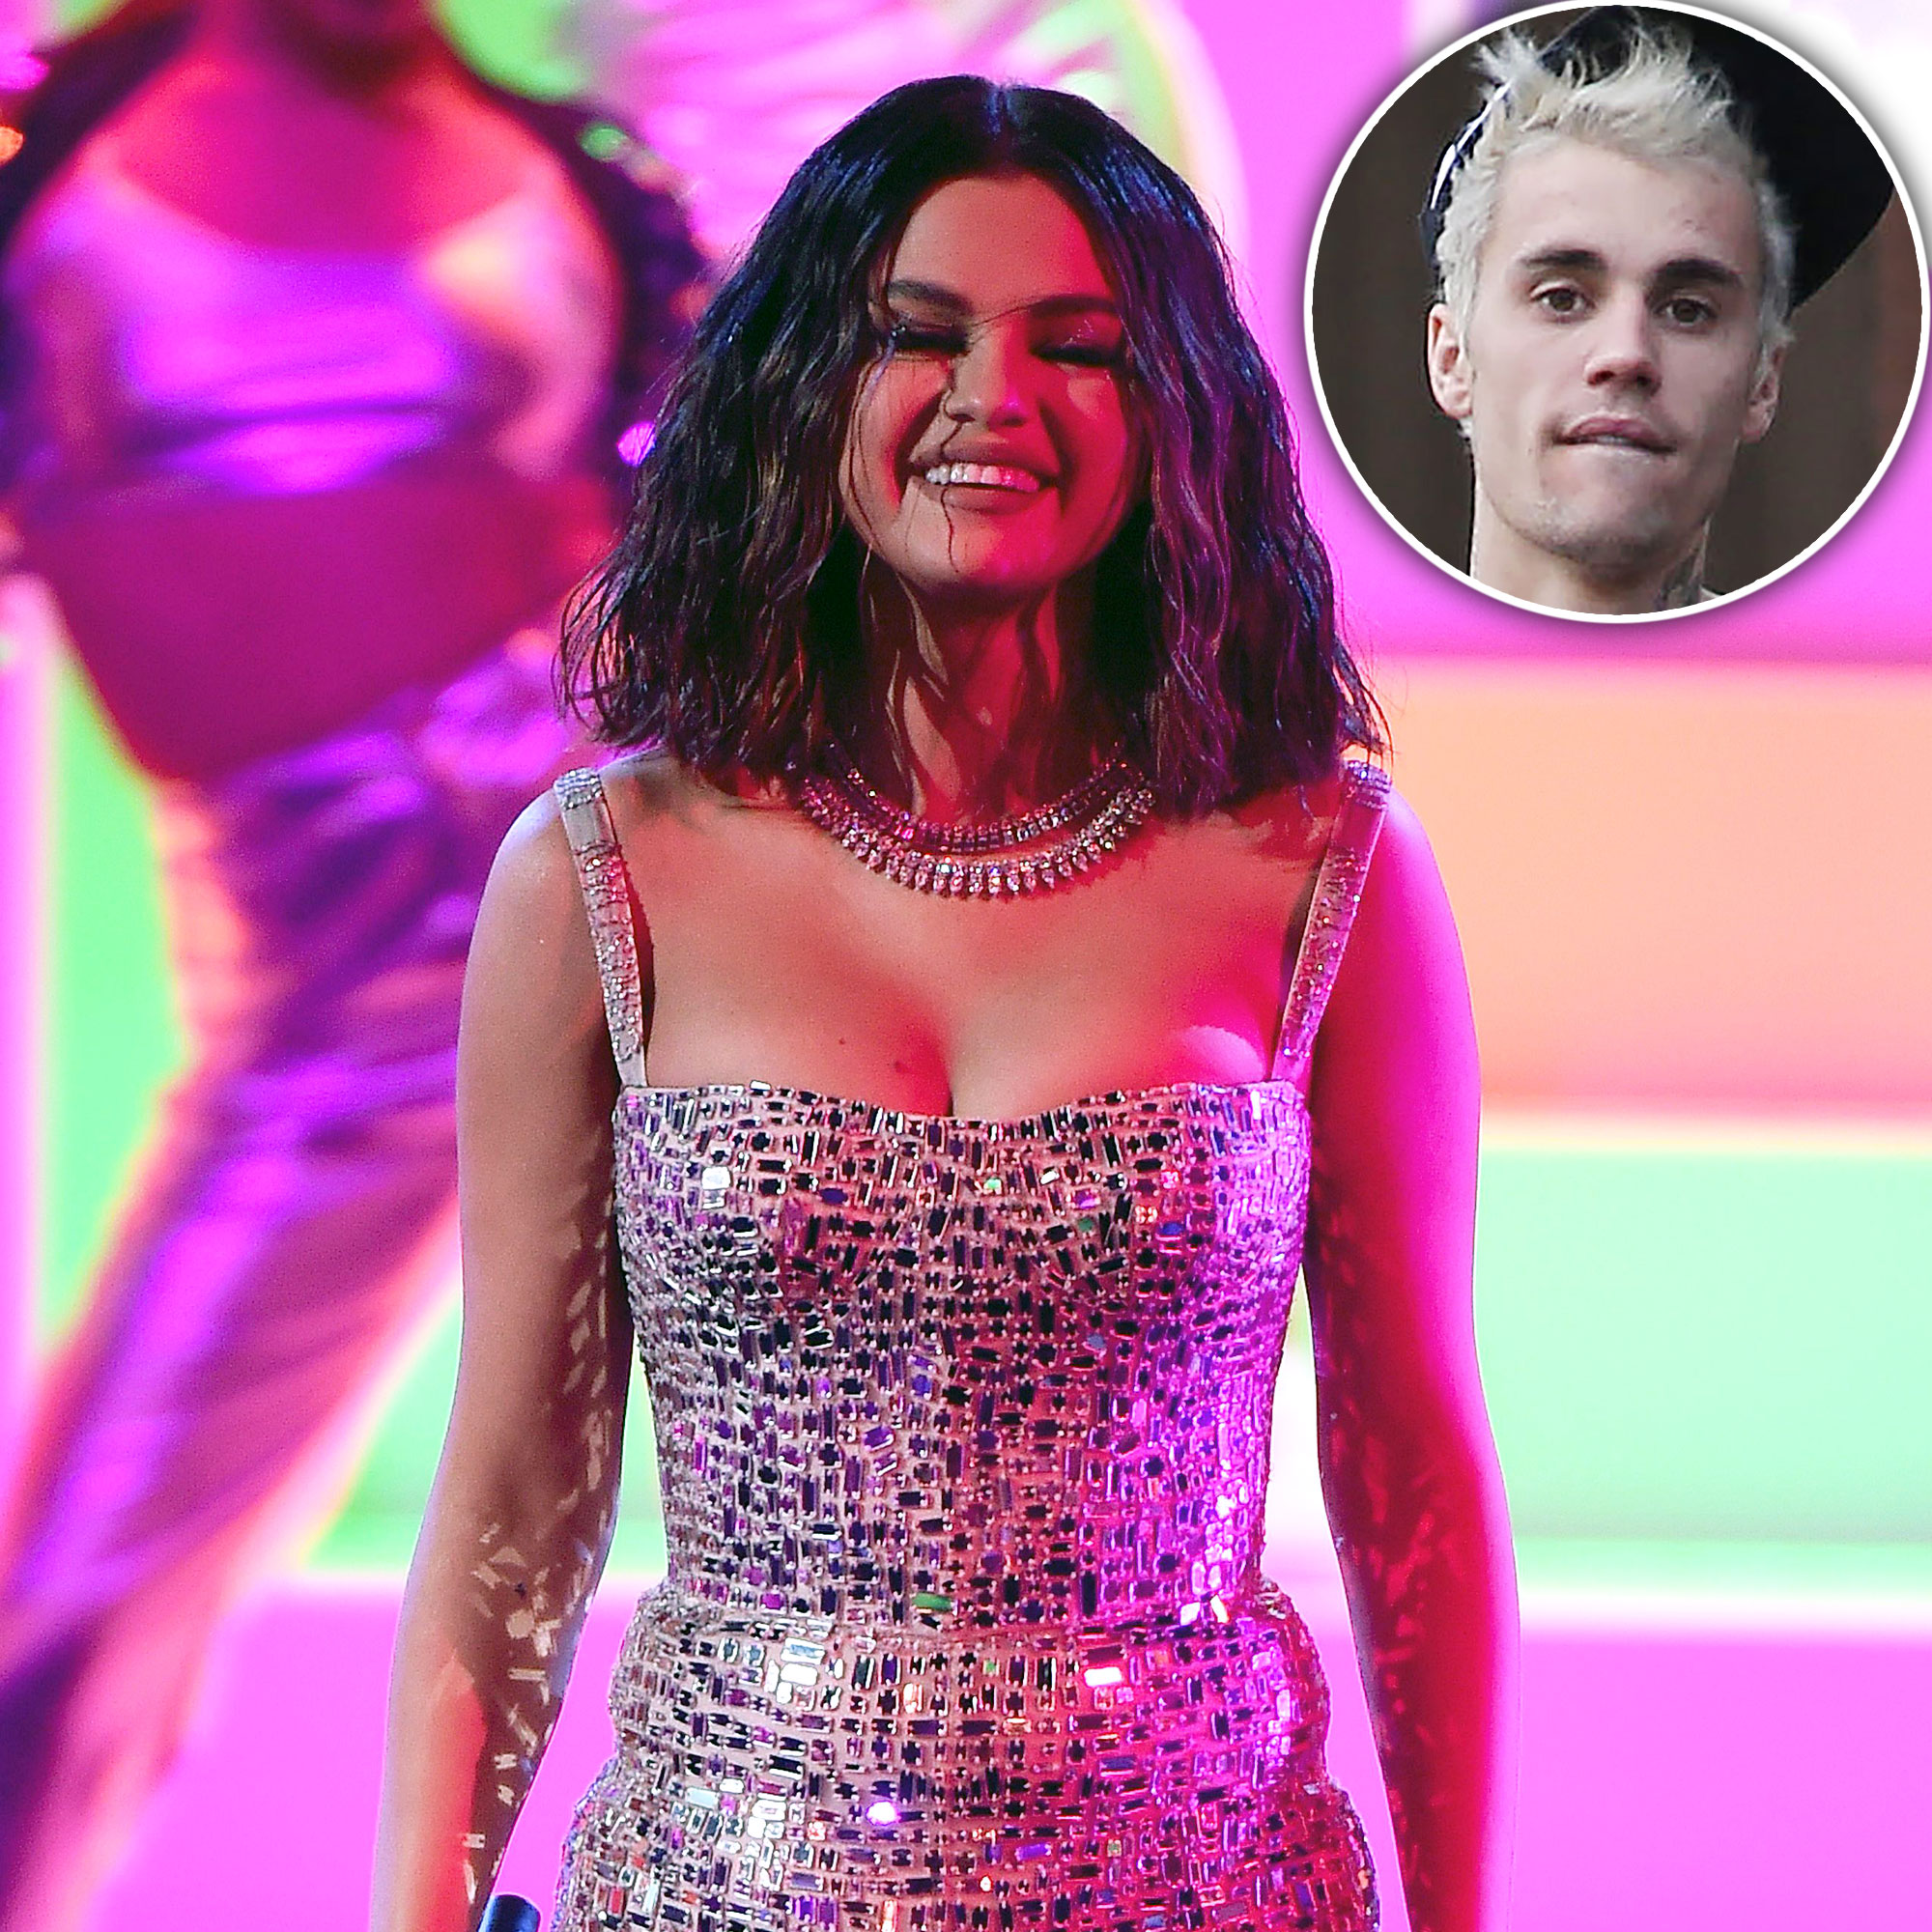 EXCLUSIVE: Selena Gomez Is 'Very Happy' for Justin Bieber's First GRAMMY,  Stuns in Low-Cut Sapphire Gown